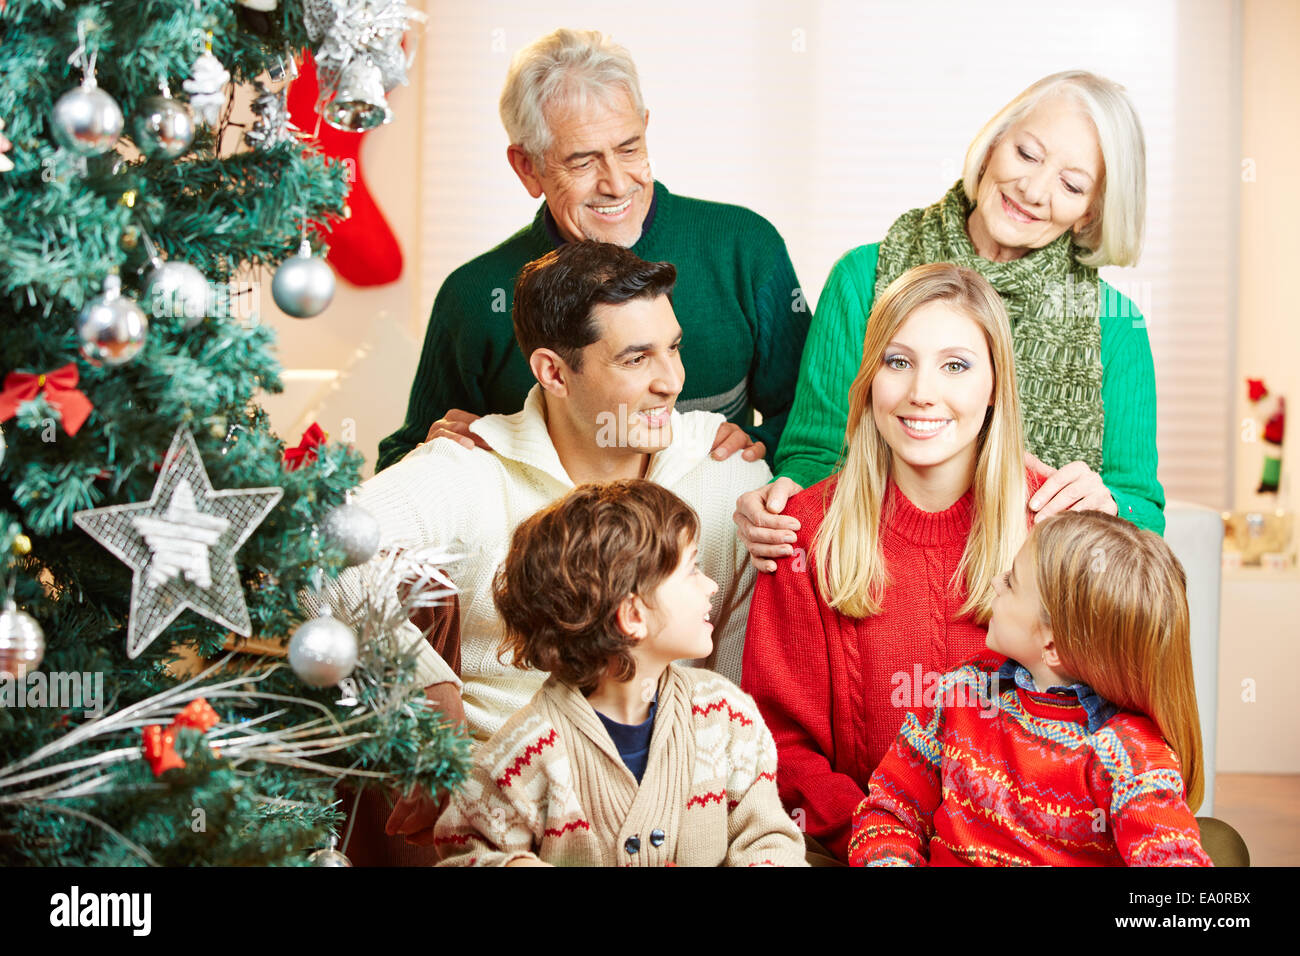 Smiling woman and her family celebrating christmas at home with tree Stock Photo